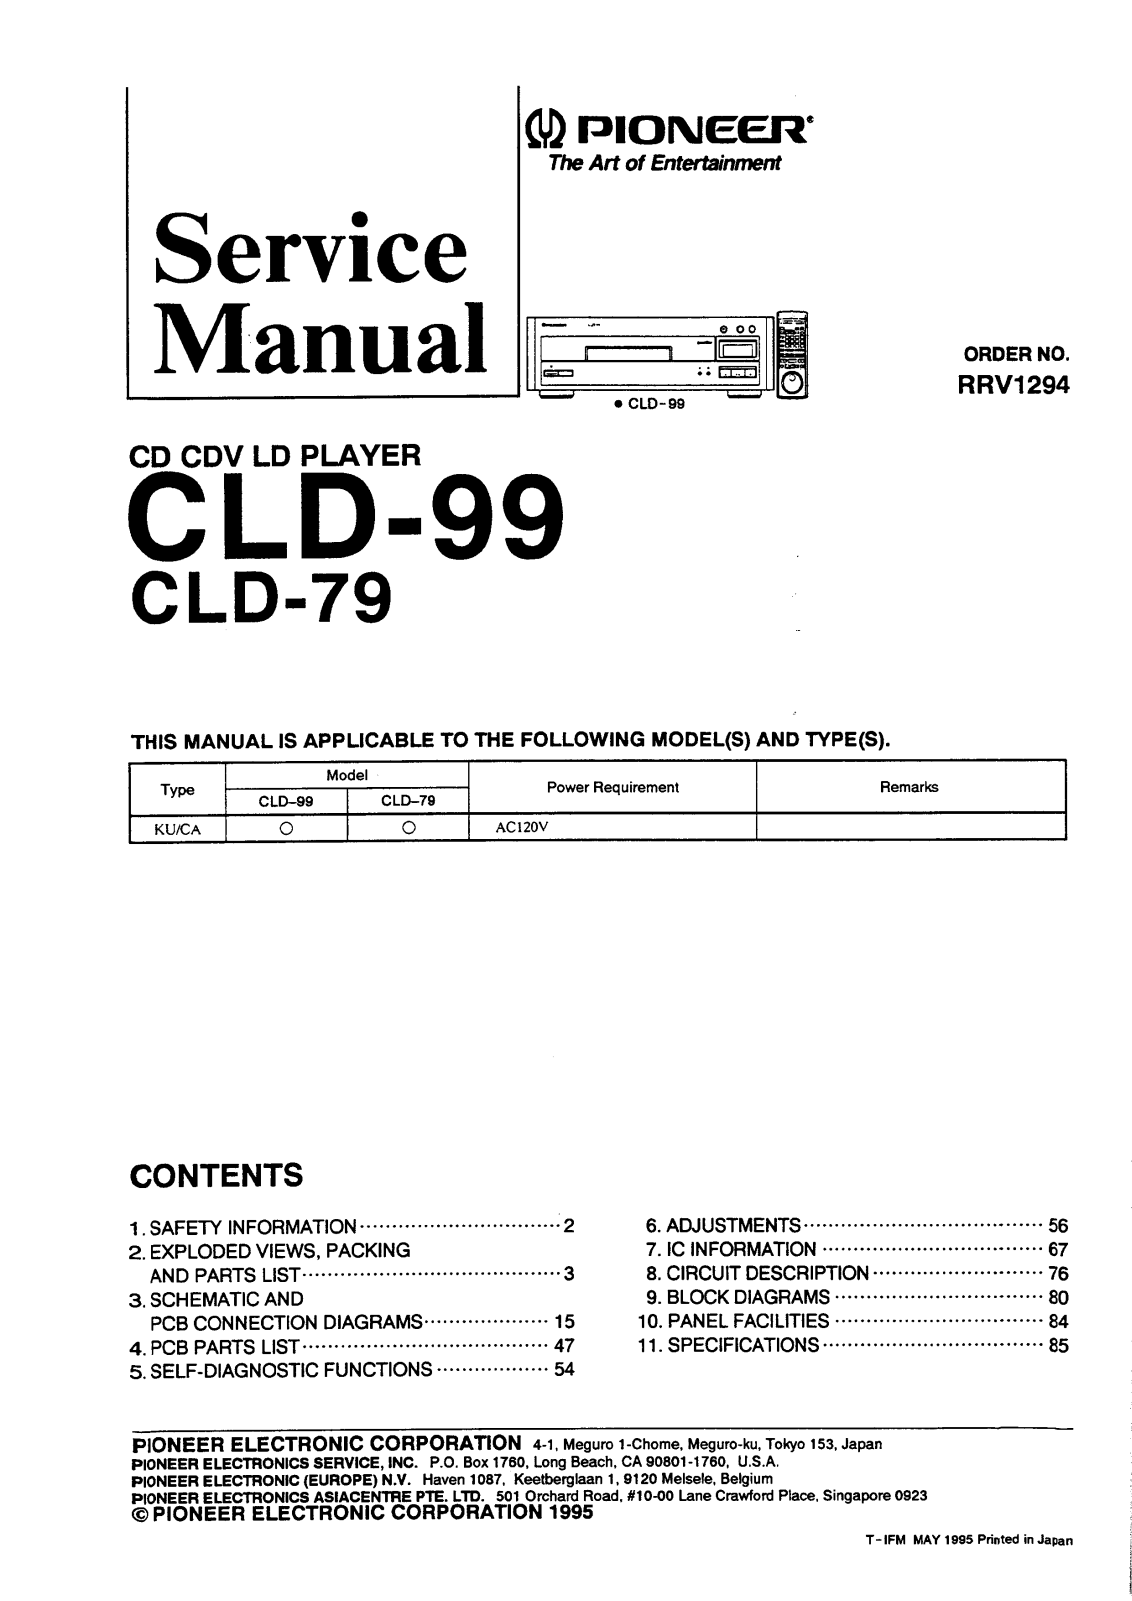 Pioneer CLD-79, CLD-99 Service manual